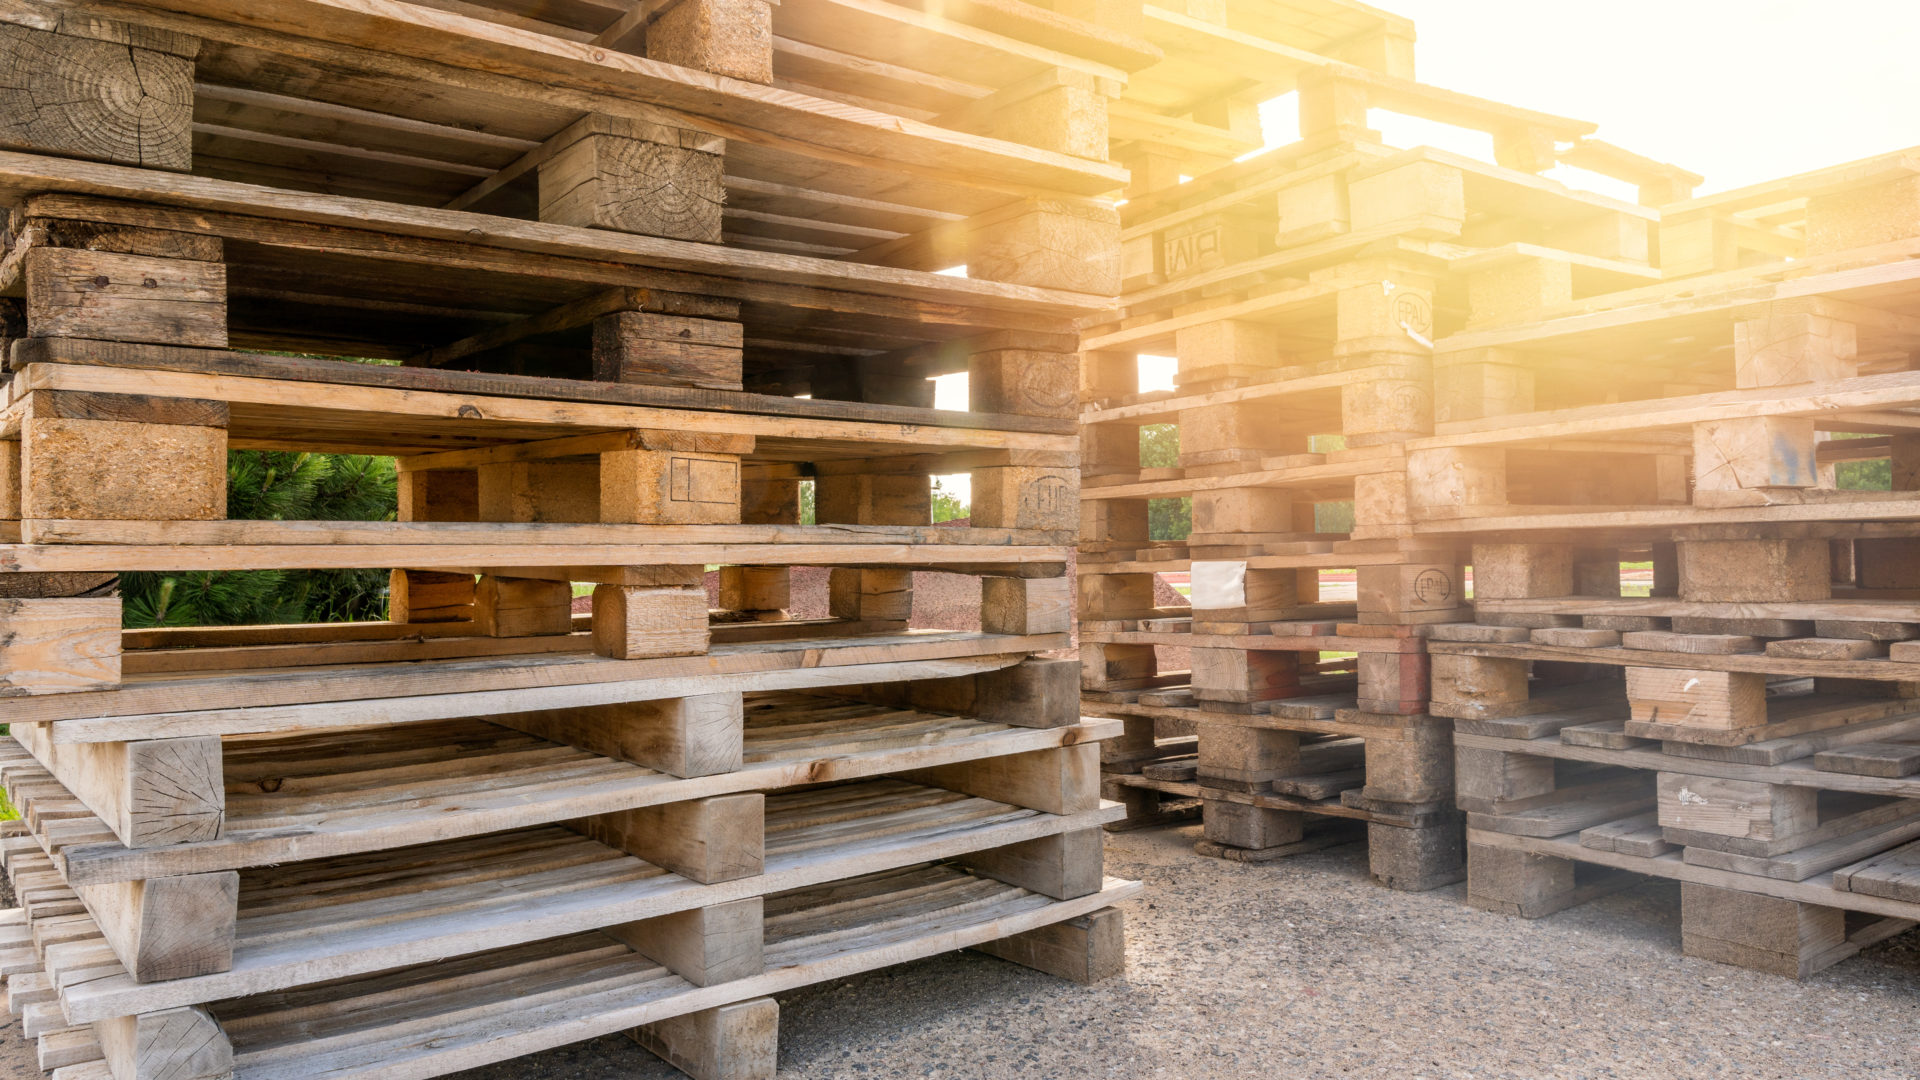 Huge piles of different type of pallet